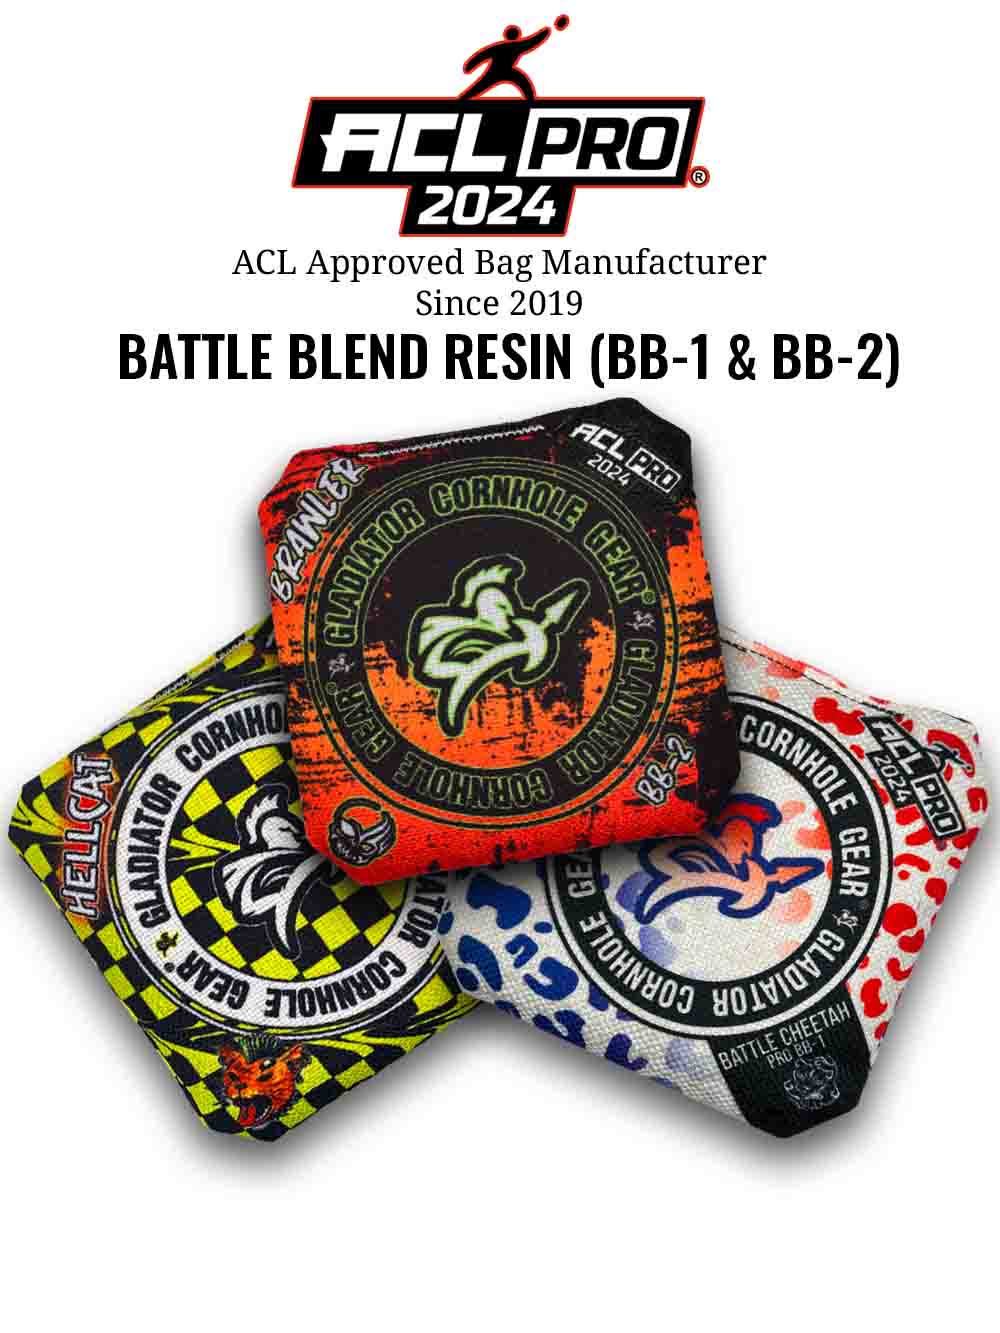 professional cornhole bags acl approved battle blend  bb 1 & bb 2 resin bags as seen on espn ACL